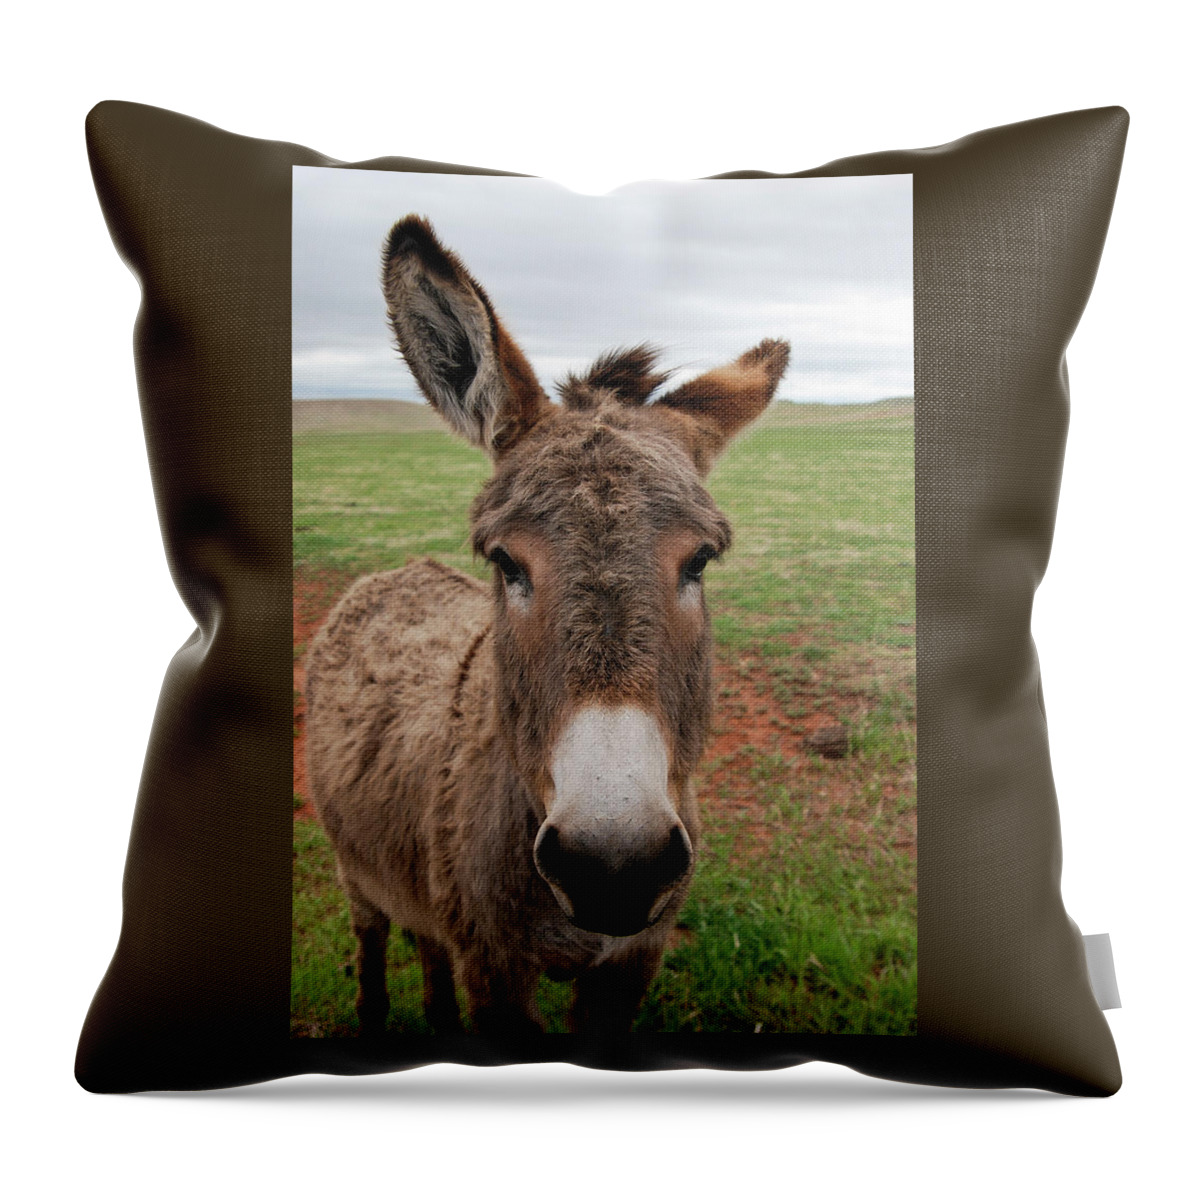 Wild Burro Throw Pillow featuring the photograph Wild Burro by Phyllis Taylor